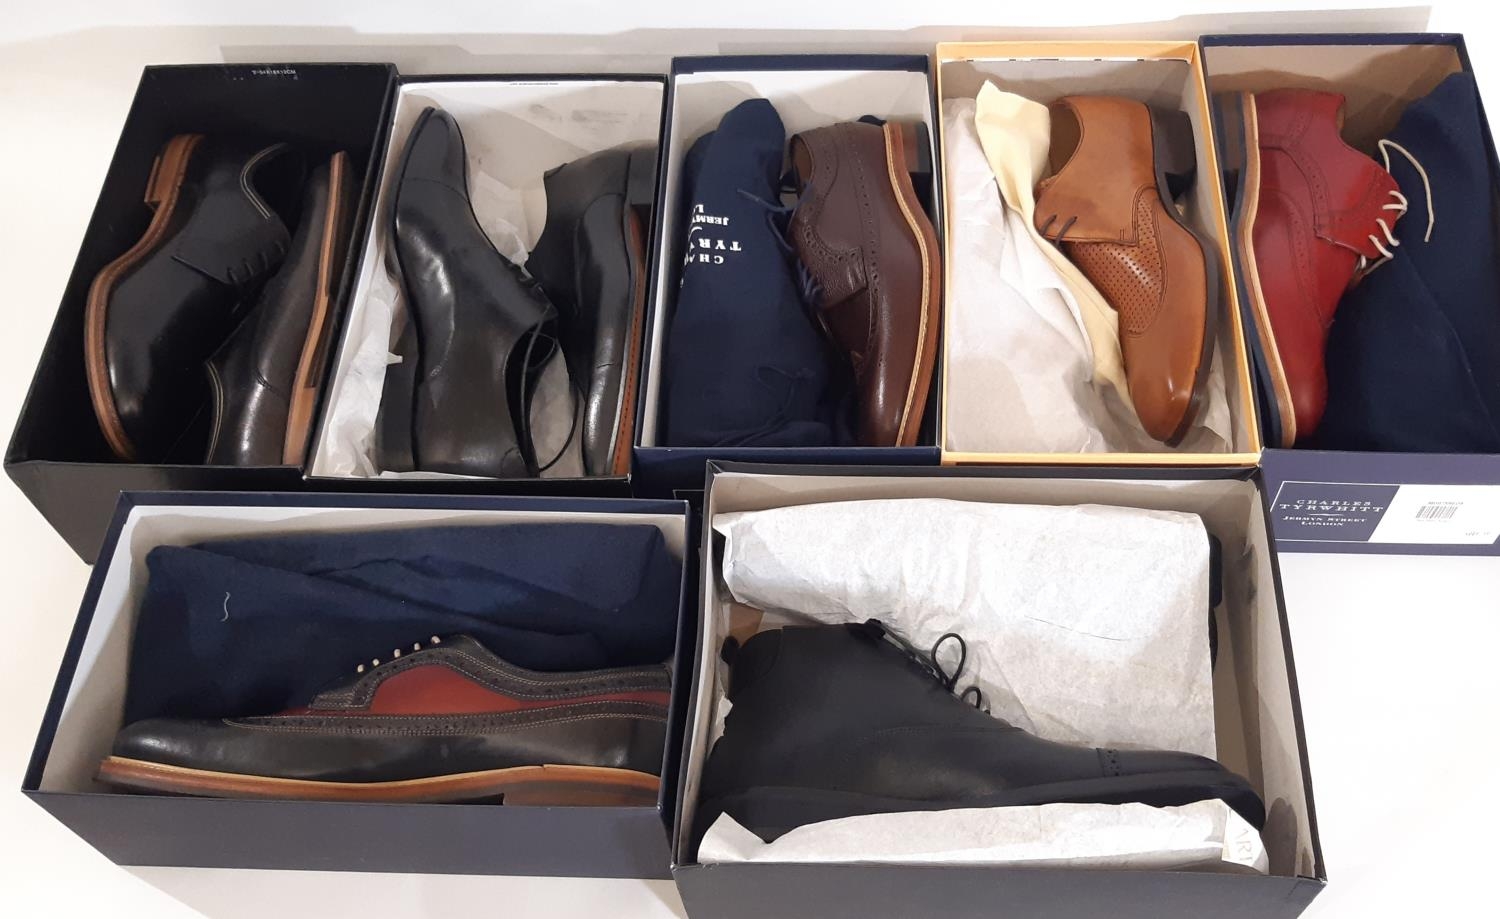 7 pairs of good quality men's shoes/boots/brogues all boxed and appear unworn including shoes by - Image 3 of 5